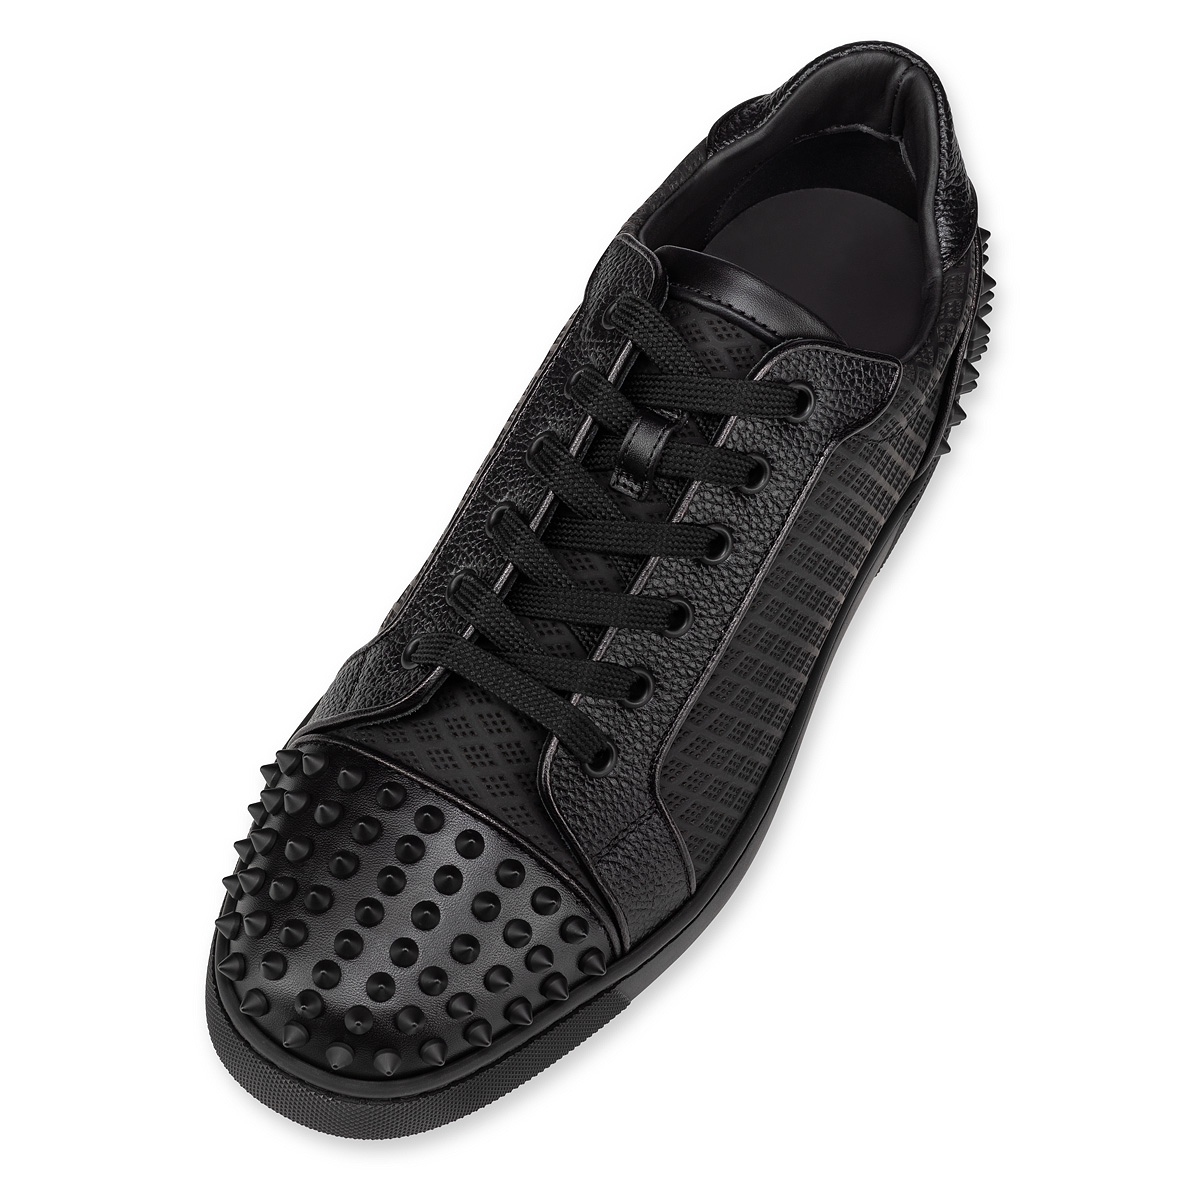 Seavaste 2 - Low-top sneakers - Calf leather and spikes - Black - Christian  Louboutin